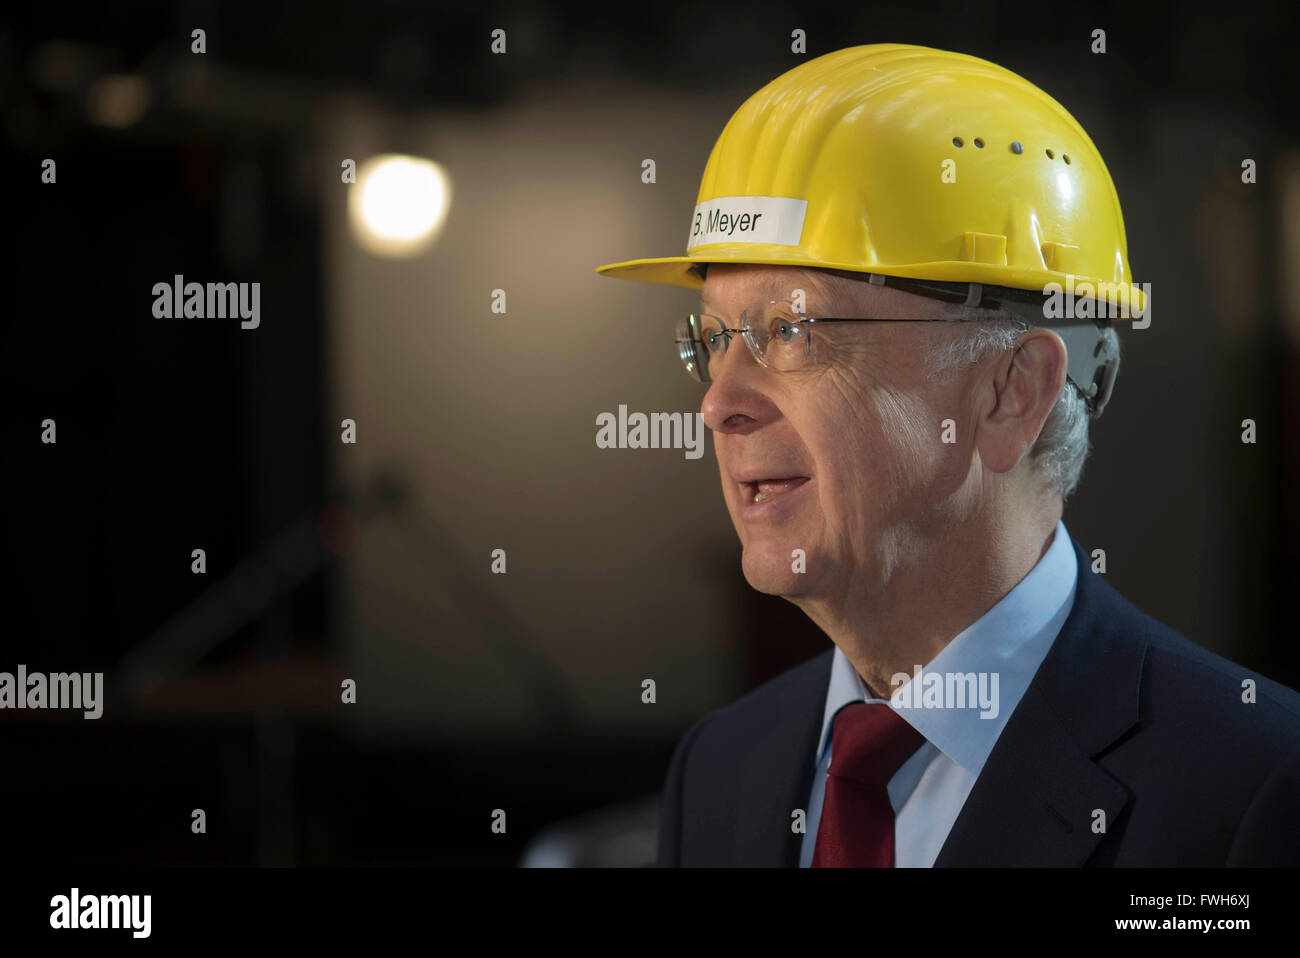 Papenburg, Germany. 05th Apr, 2016. Bernhard Meyer, general manager of the Meyer shipyard, speaks during the keel laying of the new cruise ship 'Norwegian Joy' in Papenburg, Germany, 05 April 2016. US shipping company Norwegian Cruise Line has commissioned their first cruise vessel solely catering to the Chinese market to be built by Papenburg-based Meyer shipyard. Photo: LARS KLEMMER/dpa/Alamy Live News Stock Photo